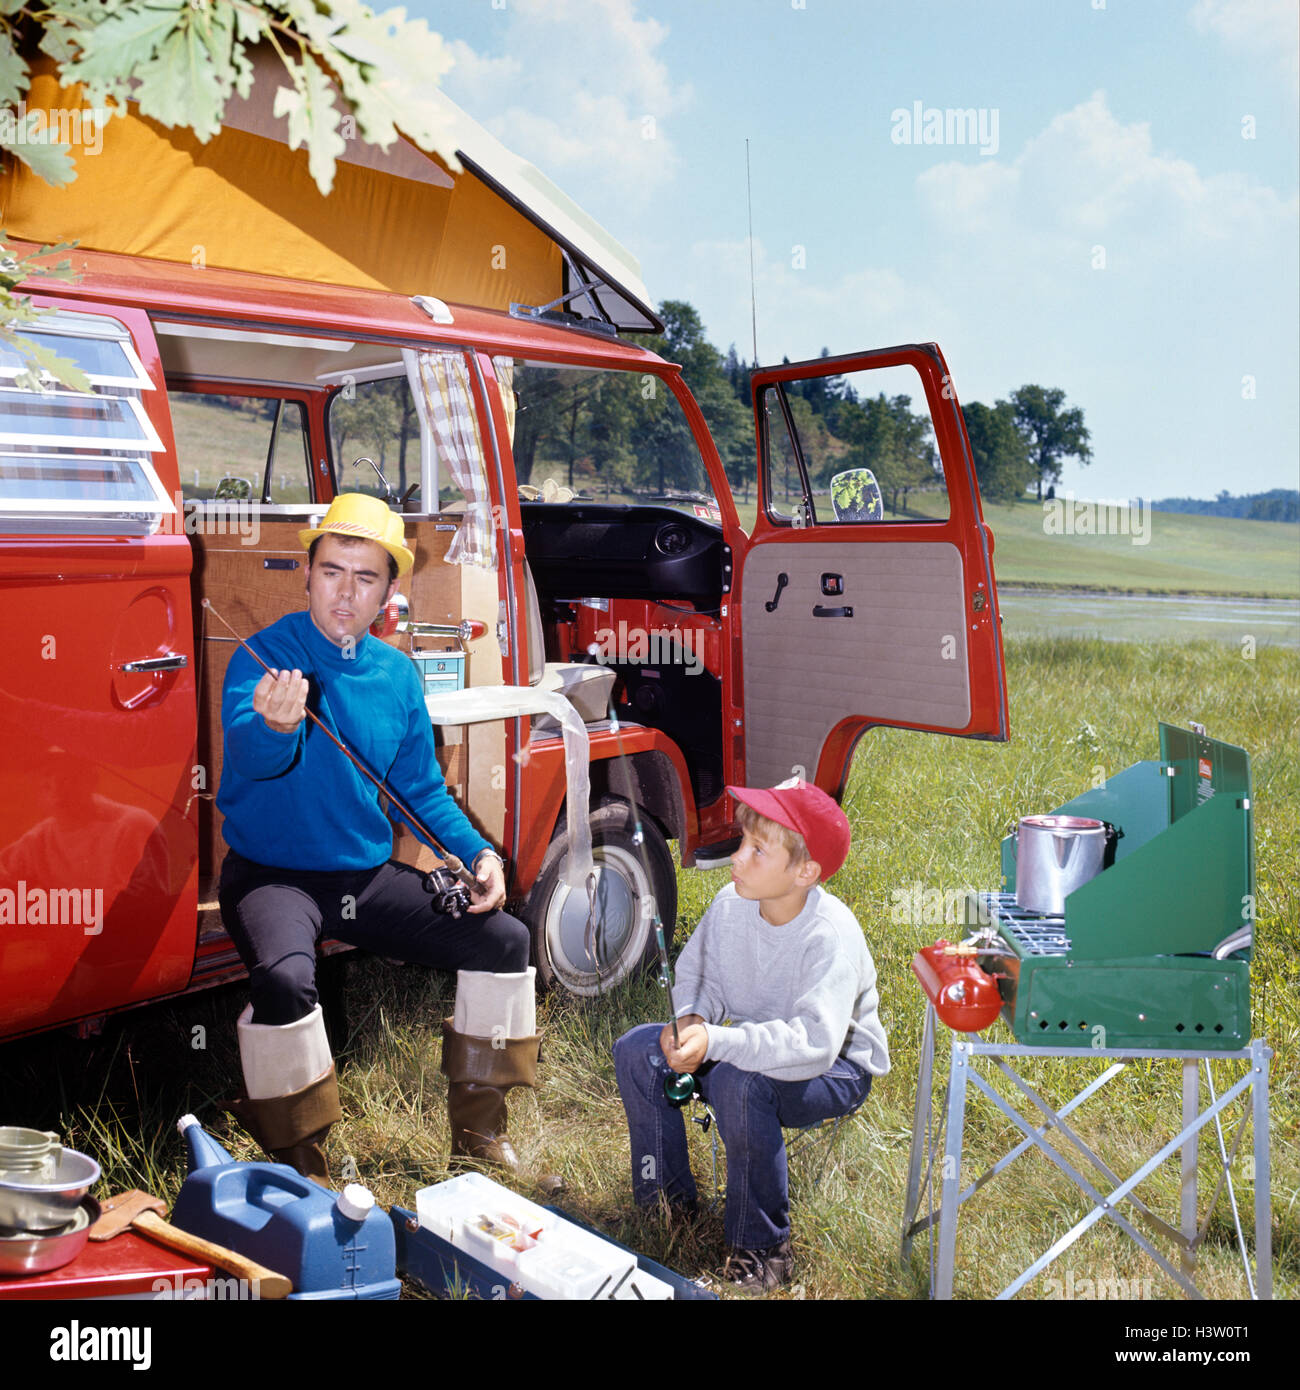 1970s MAN AND BOY CAMPING SON SITTING BY PORTABLE STOVE FATHER SITTING BY CAMPER WITH FISHING RODS AND GEAR Stock Photo